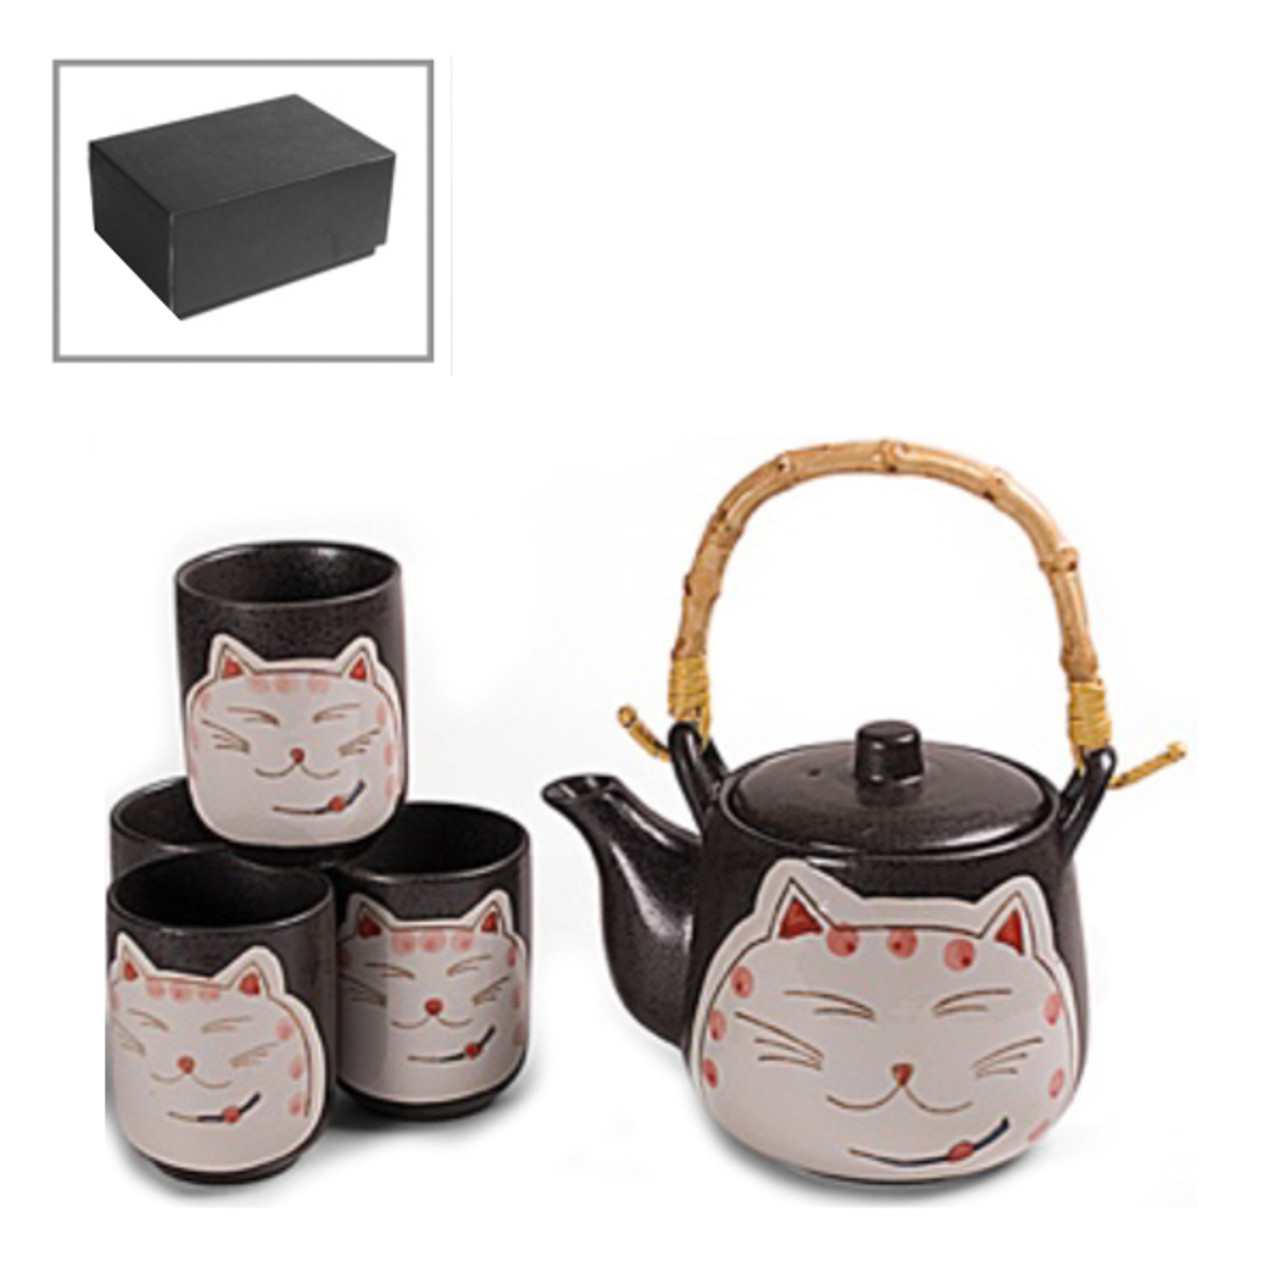 Shy Cat Tea Set - Teapot with Strainer and 4 Teacups - Merae